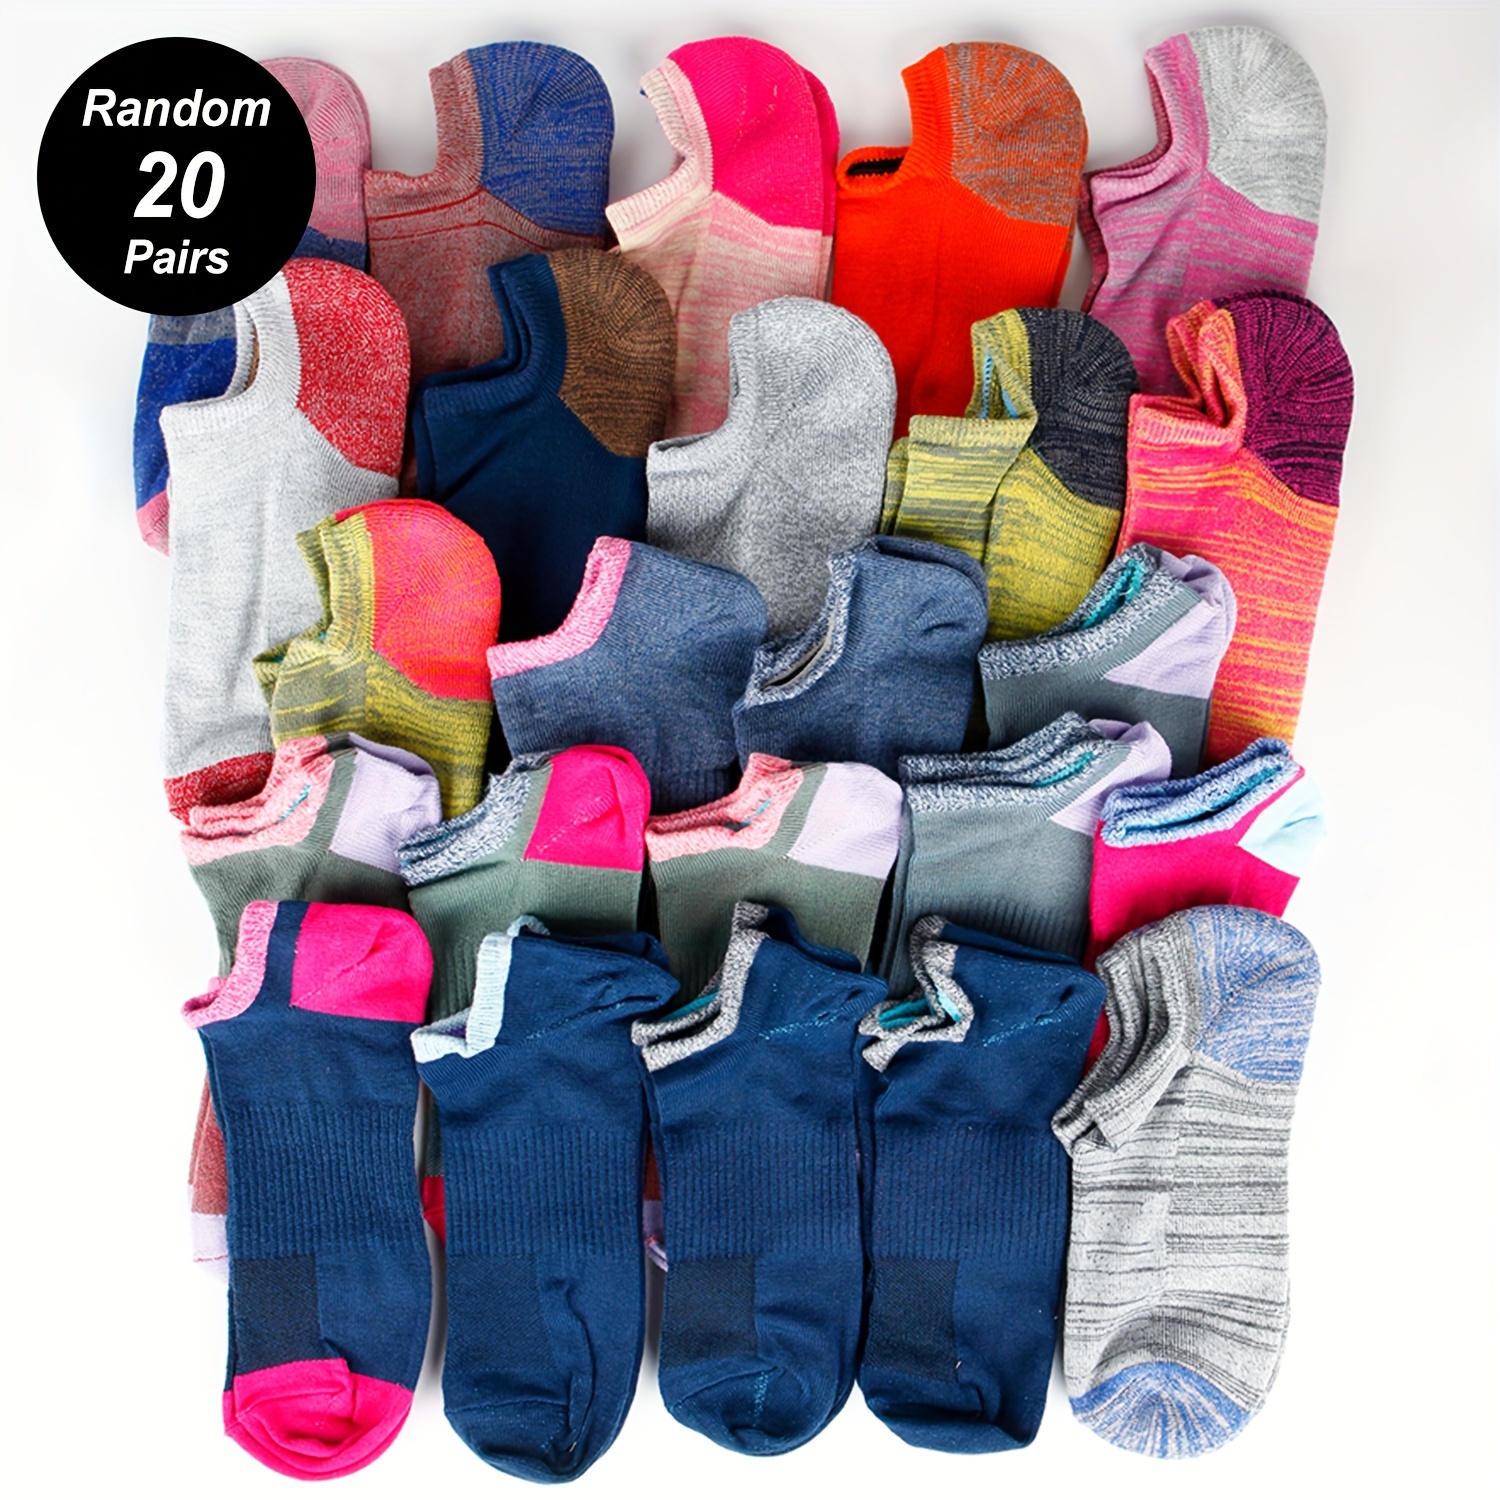 

20 Pairs Funny Random Color Socks Colorful For Unisex Bulk Womens No Show Socks Athletic Ankle Socks Cushioned Running Low Cut